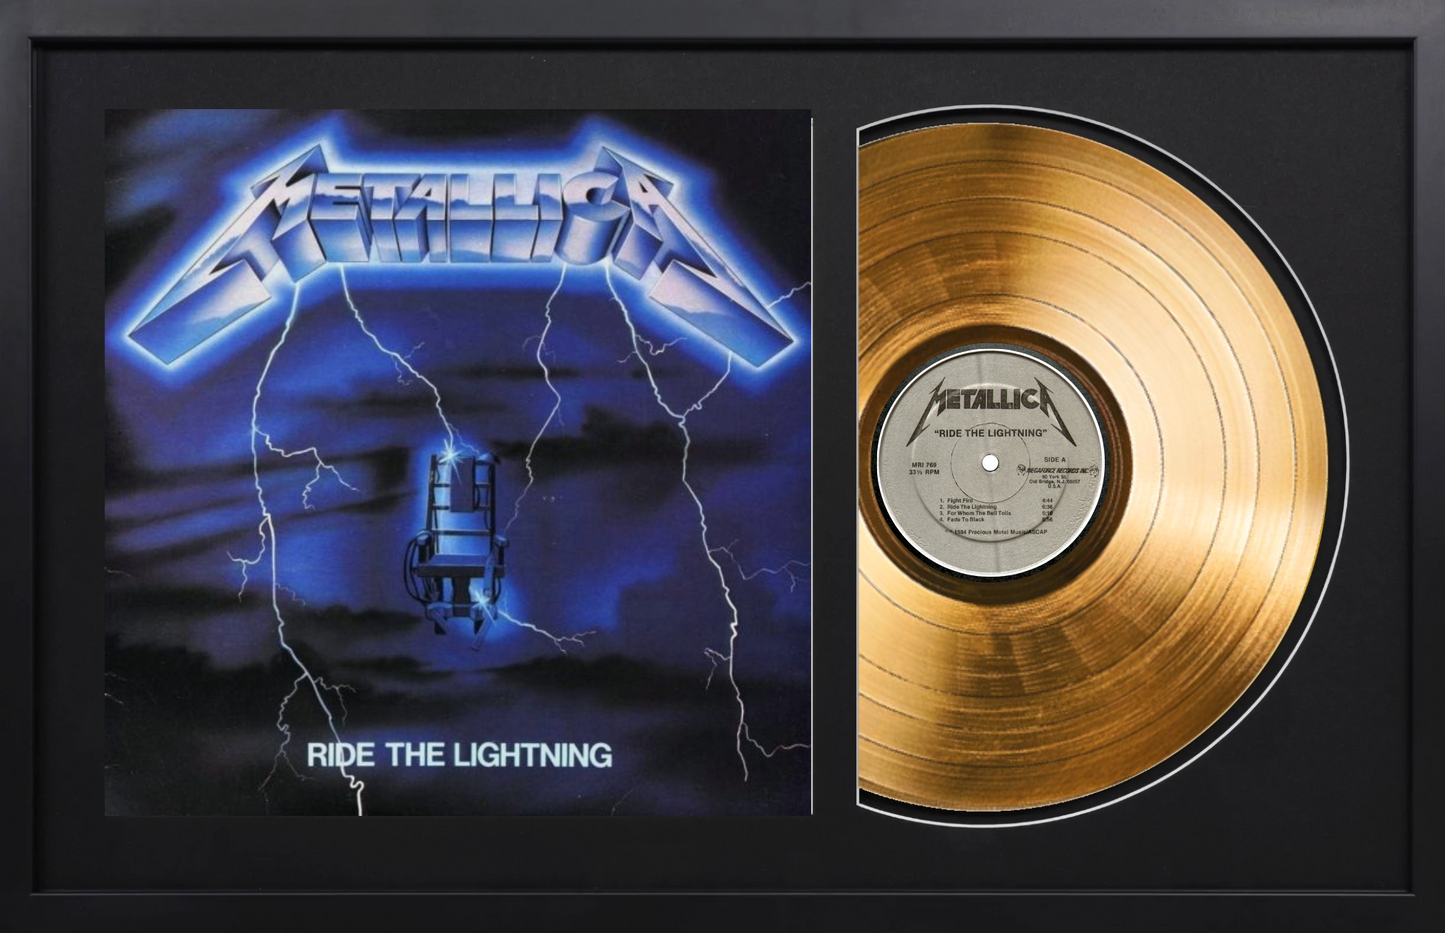 Metallica - Ride The Lightning - 14K Gold Plated, Limited Edition Album